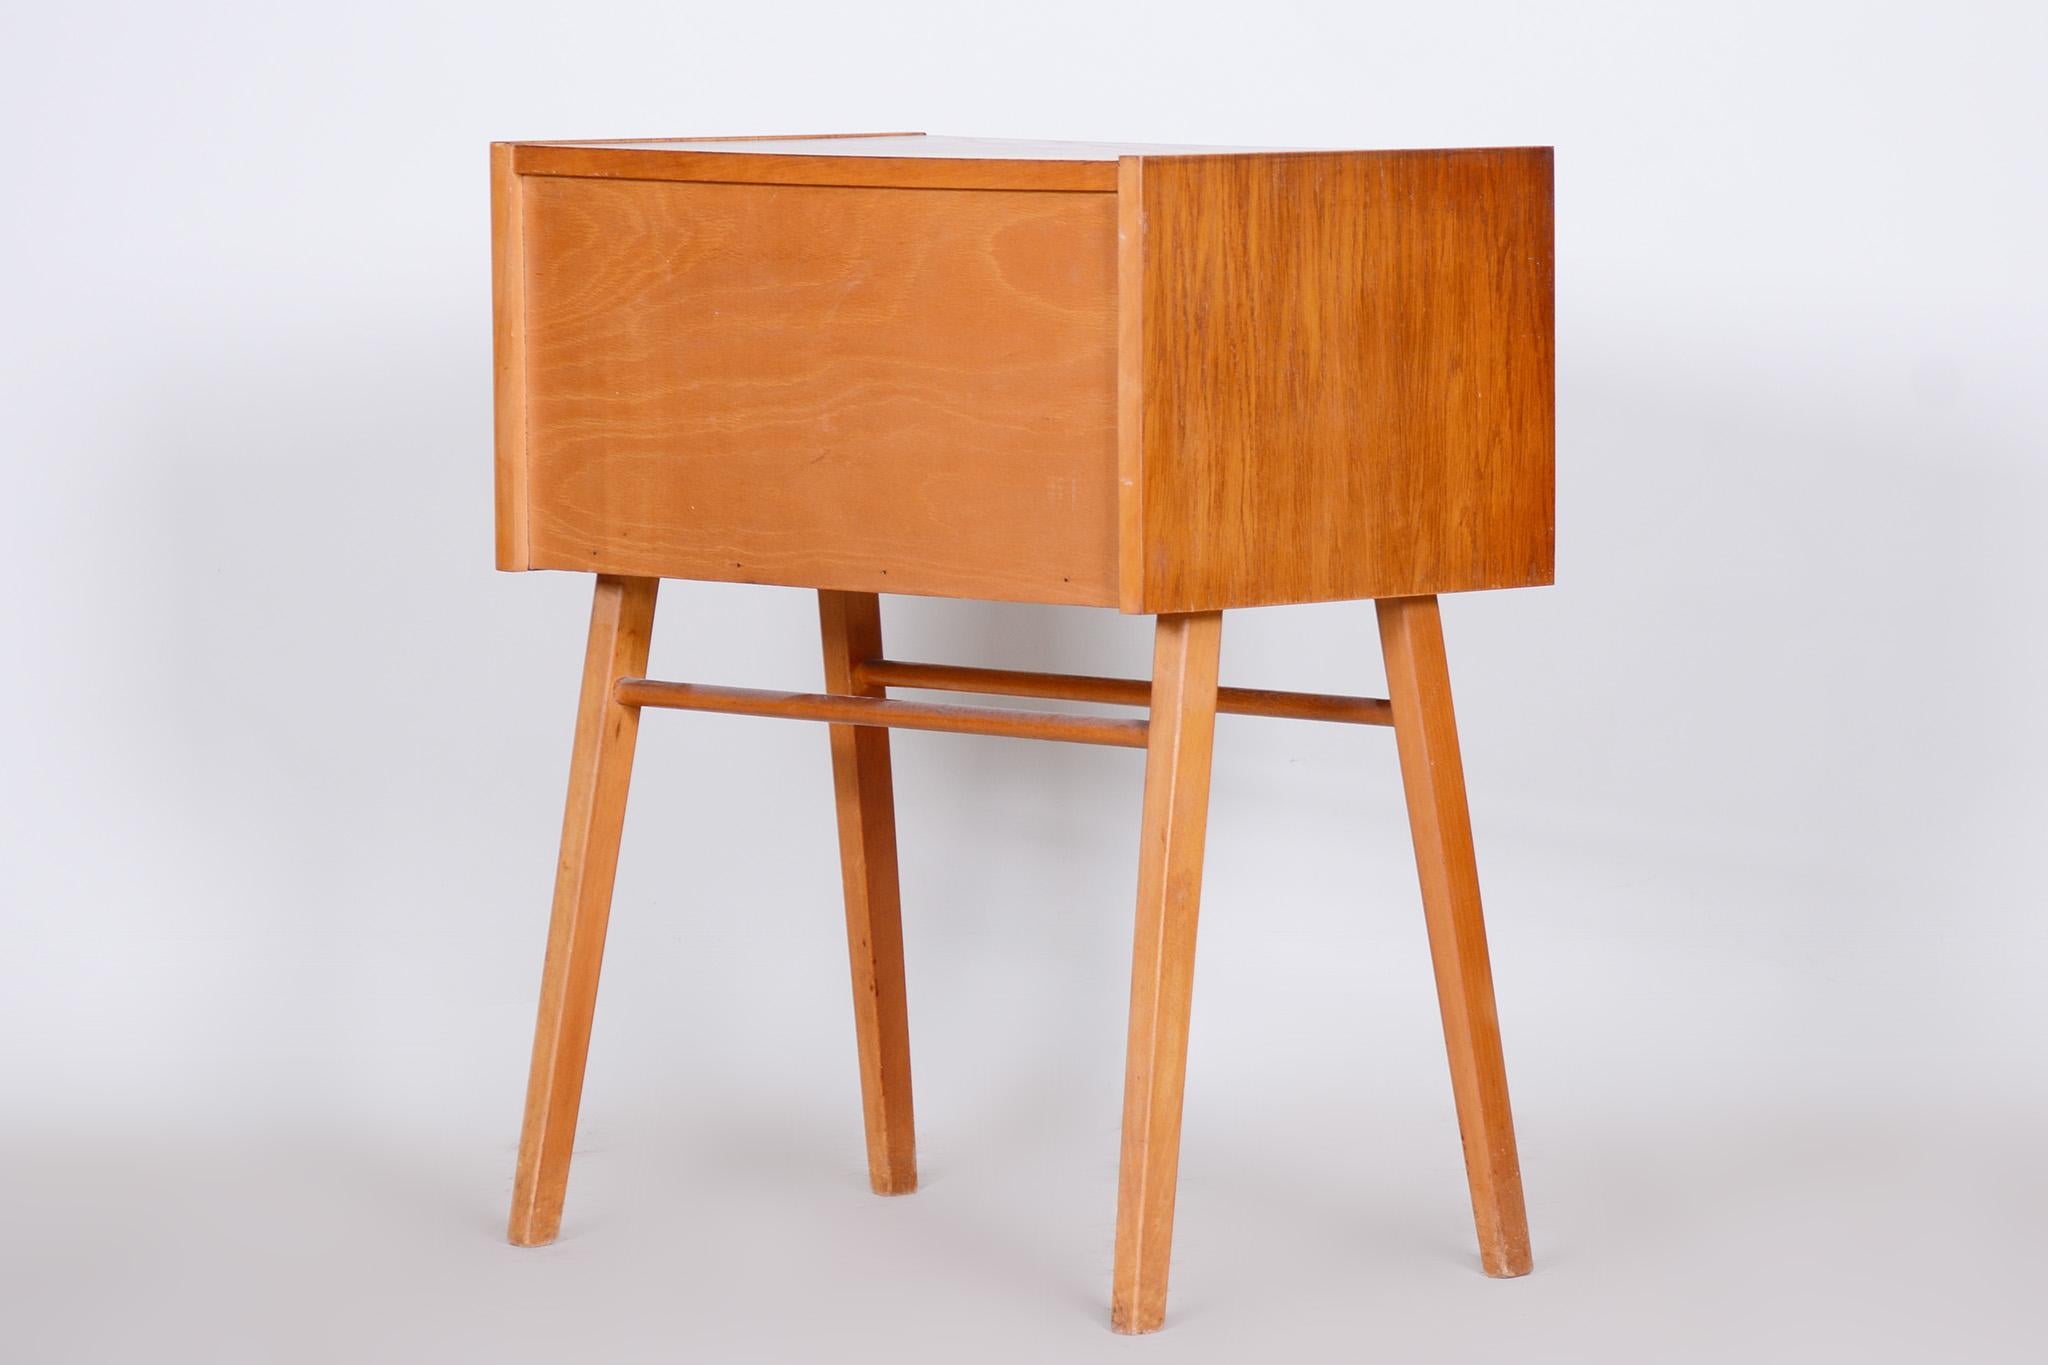 Czech Mid-Century Side Table, Cabinet Made Out of Oak, 1950s, Refreshed Polish For Sale 4